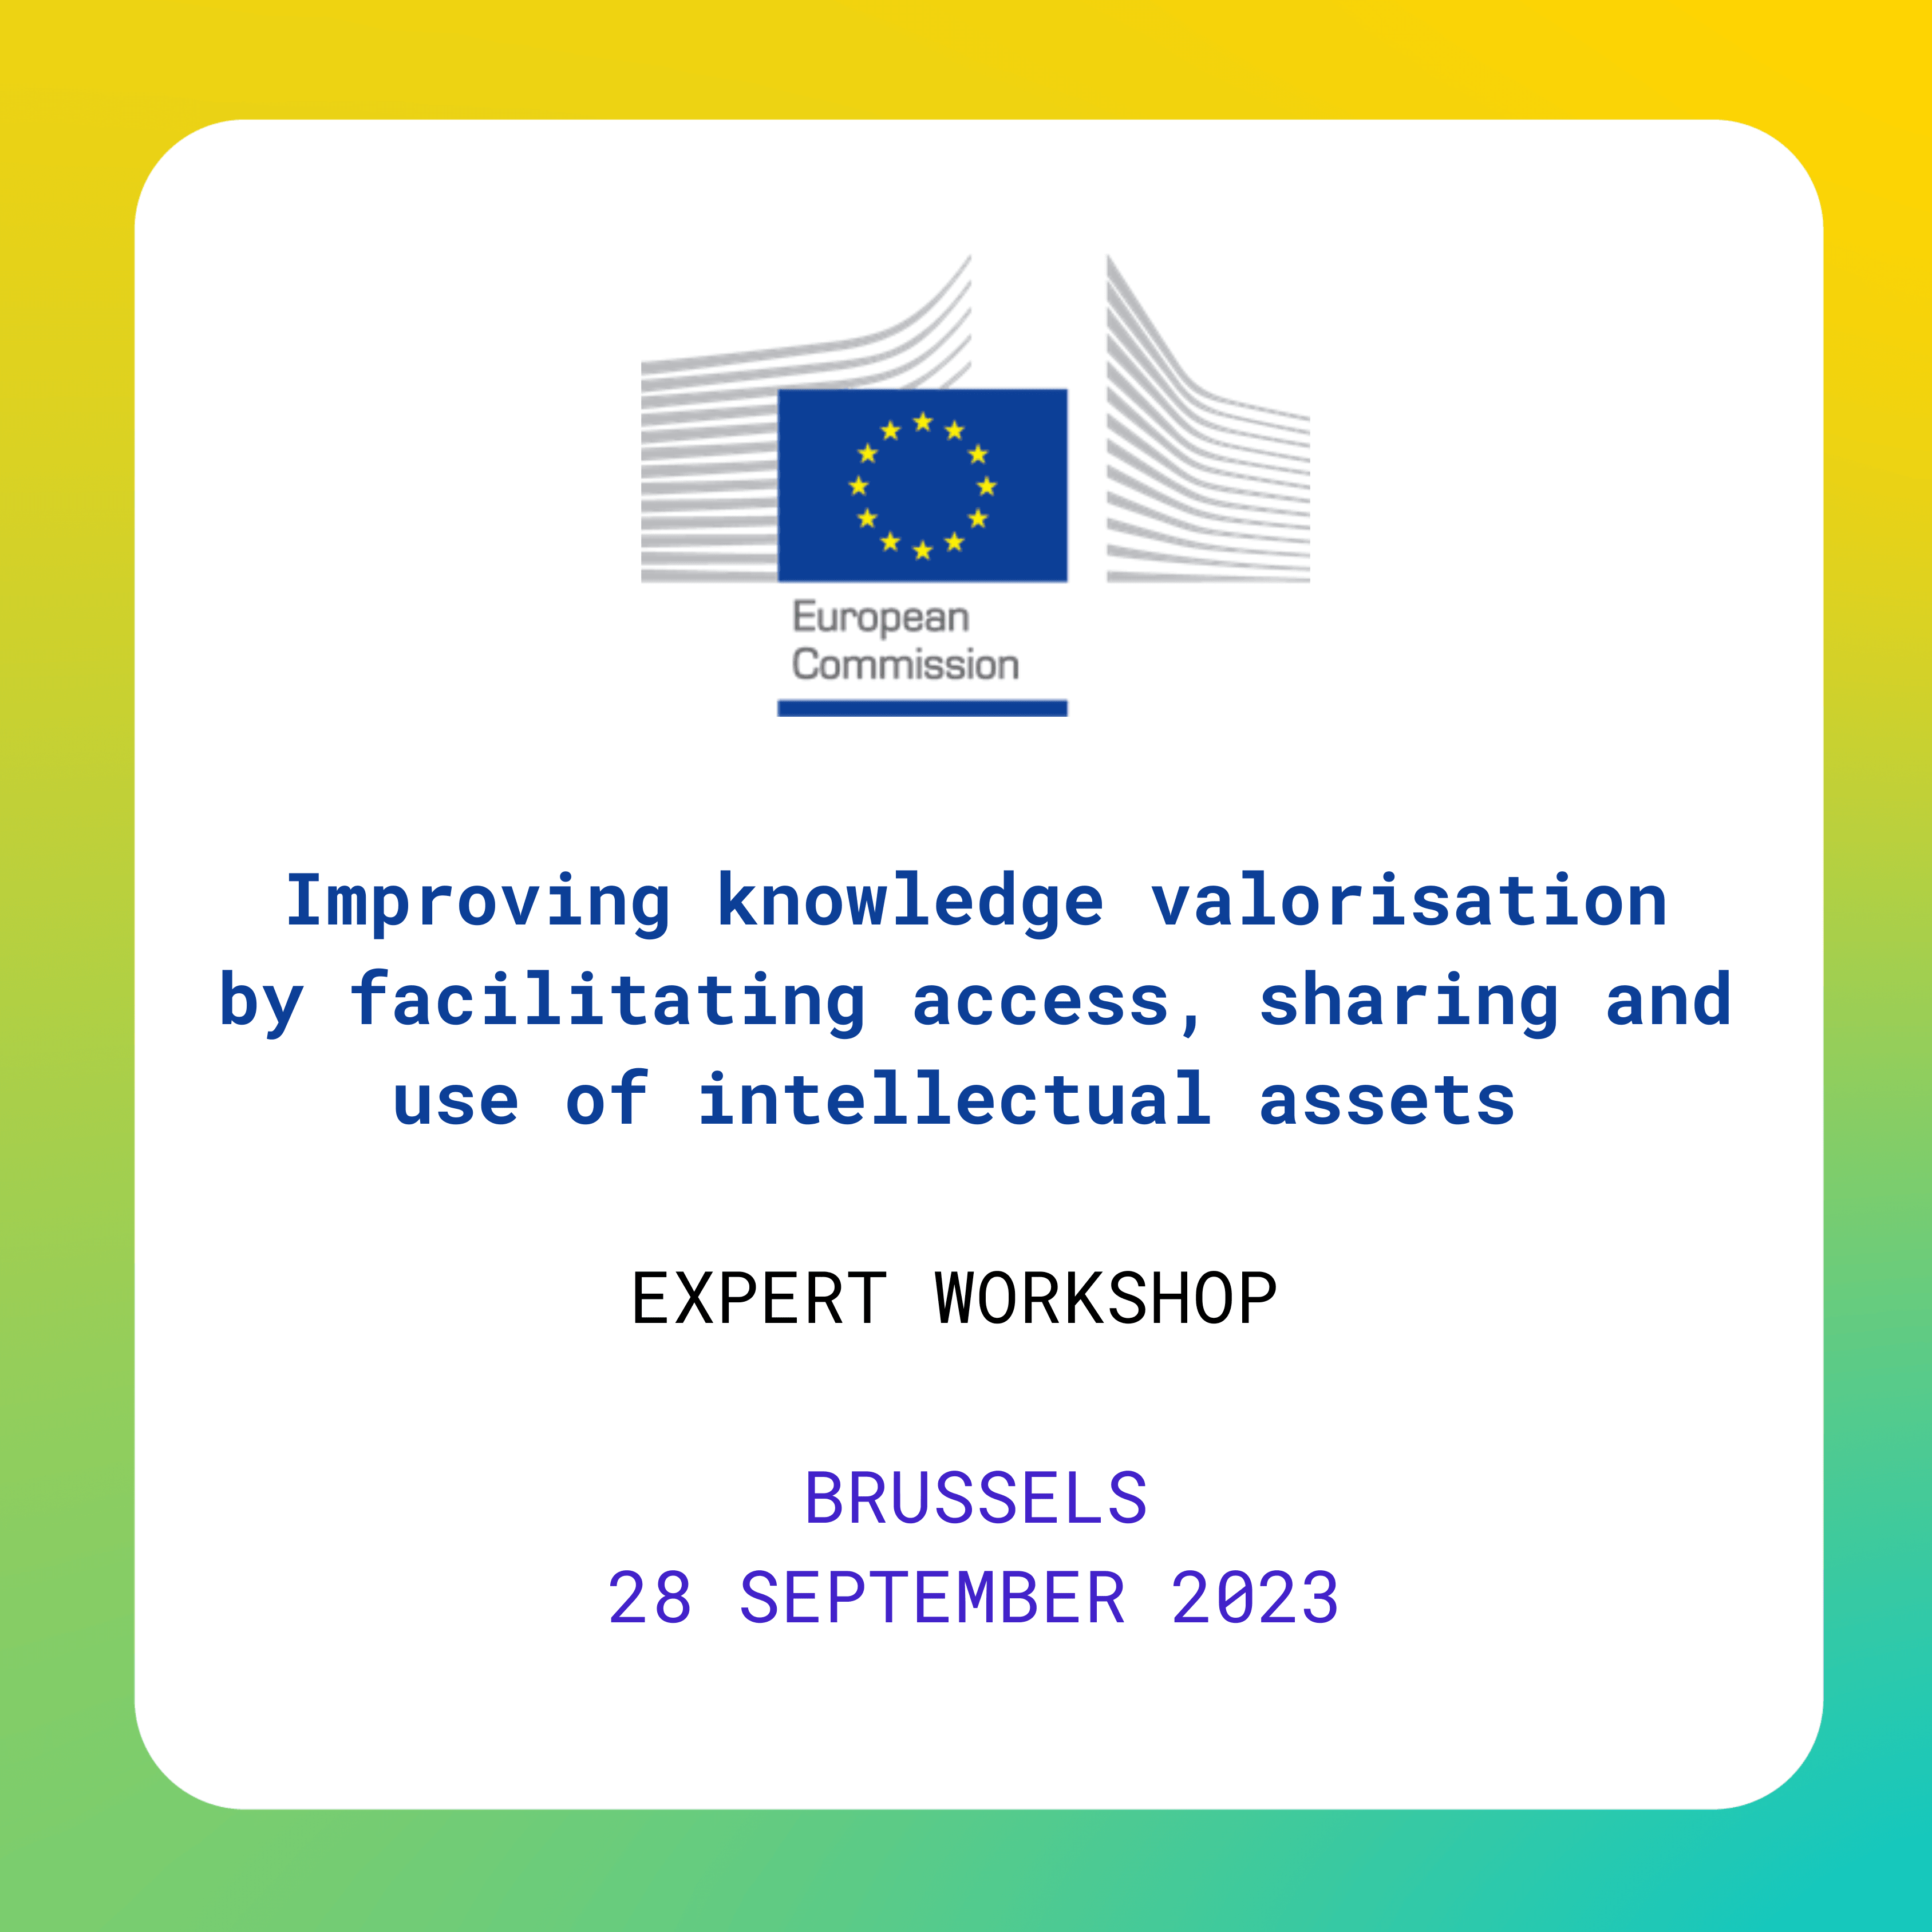 ScoutinScience to Share Insights at Expert Workshop on Knowledge Valorisation